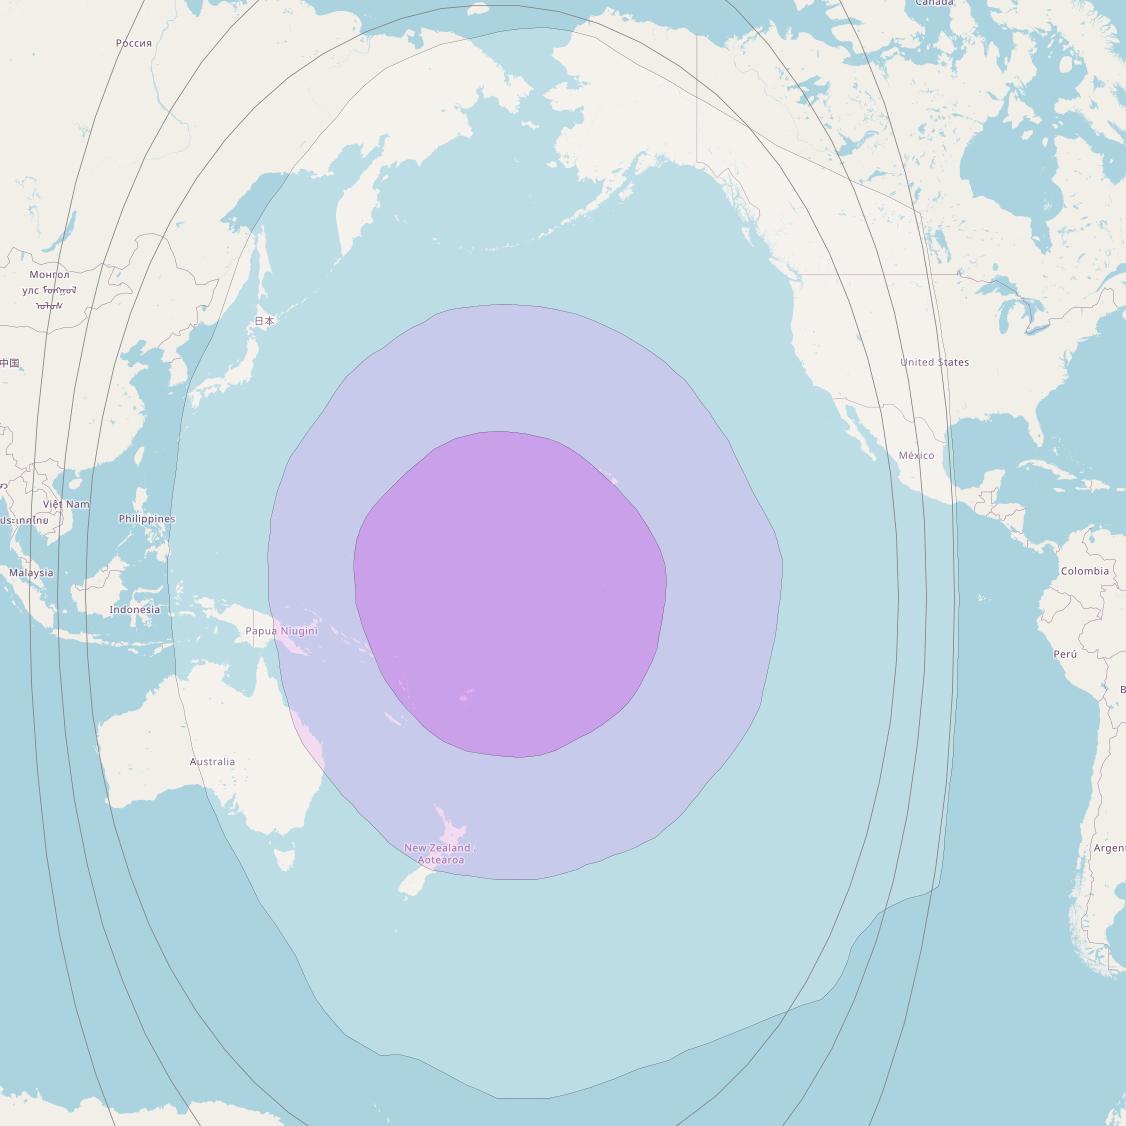 NSS 9 at 177° W downlink C-band Global beam coverage map